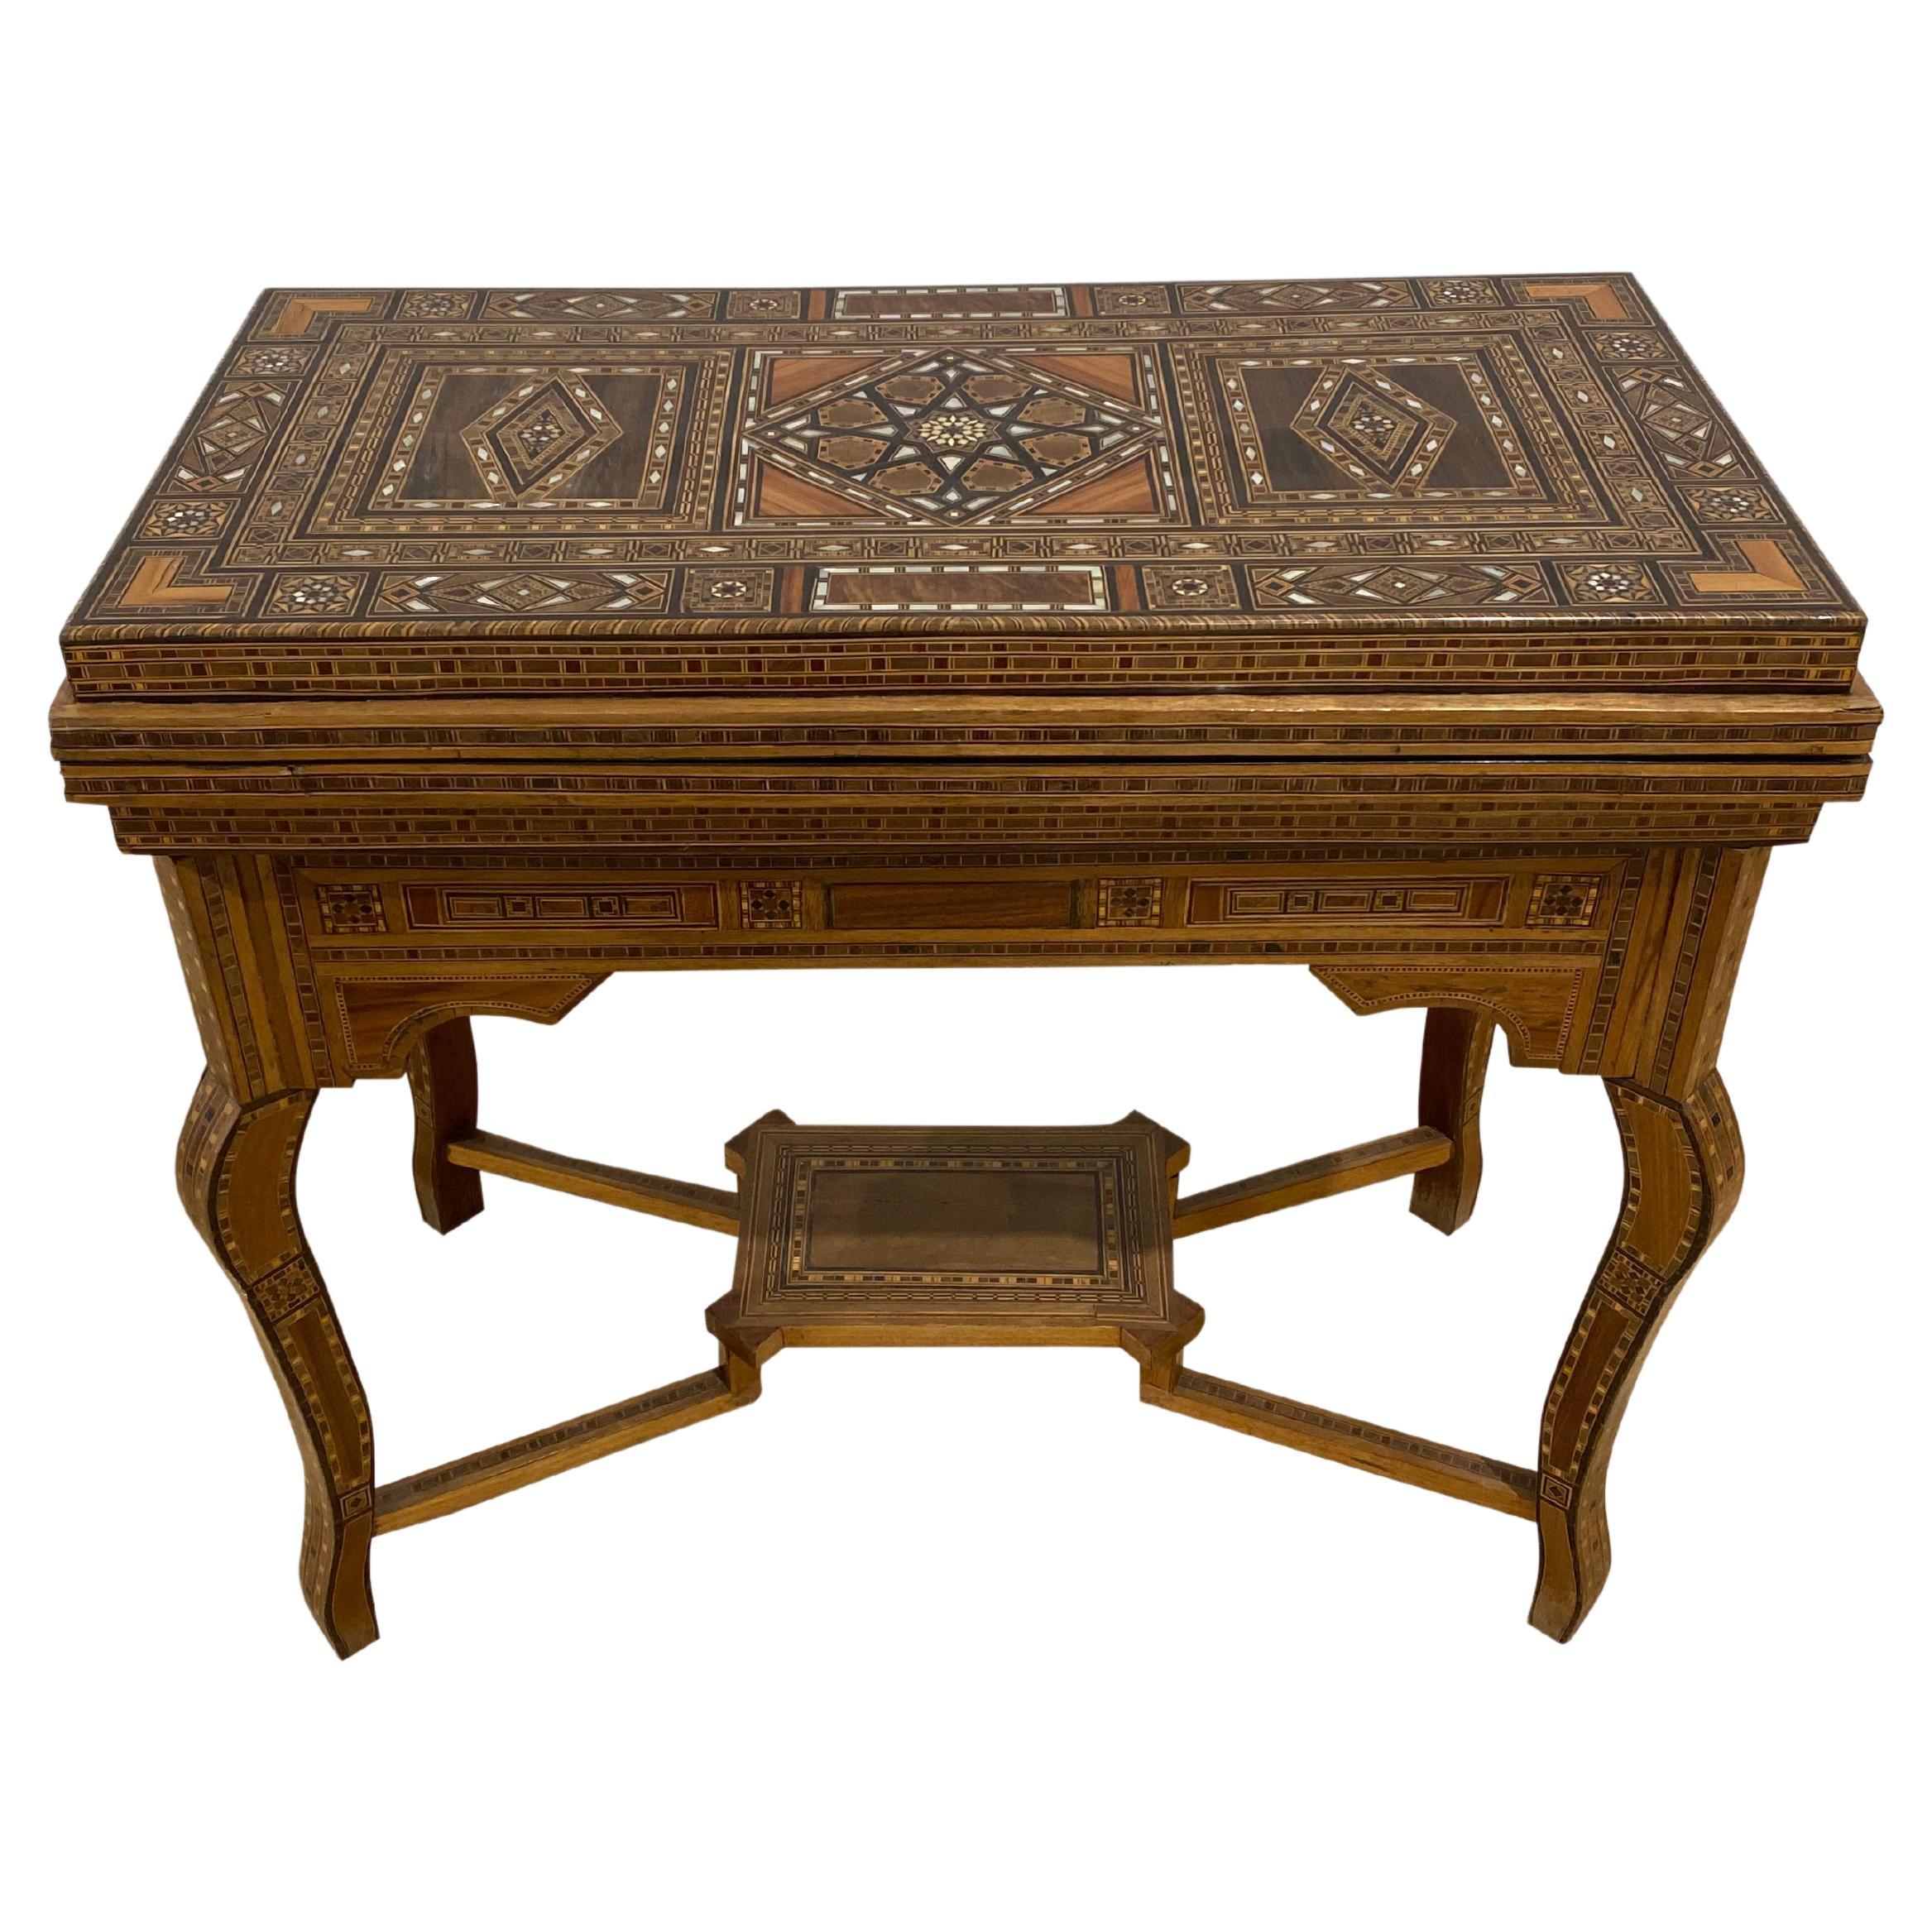 19th Century Syrian Damascus Marquetry Games Table